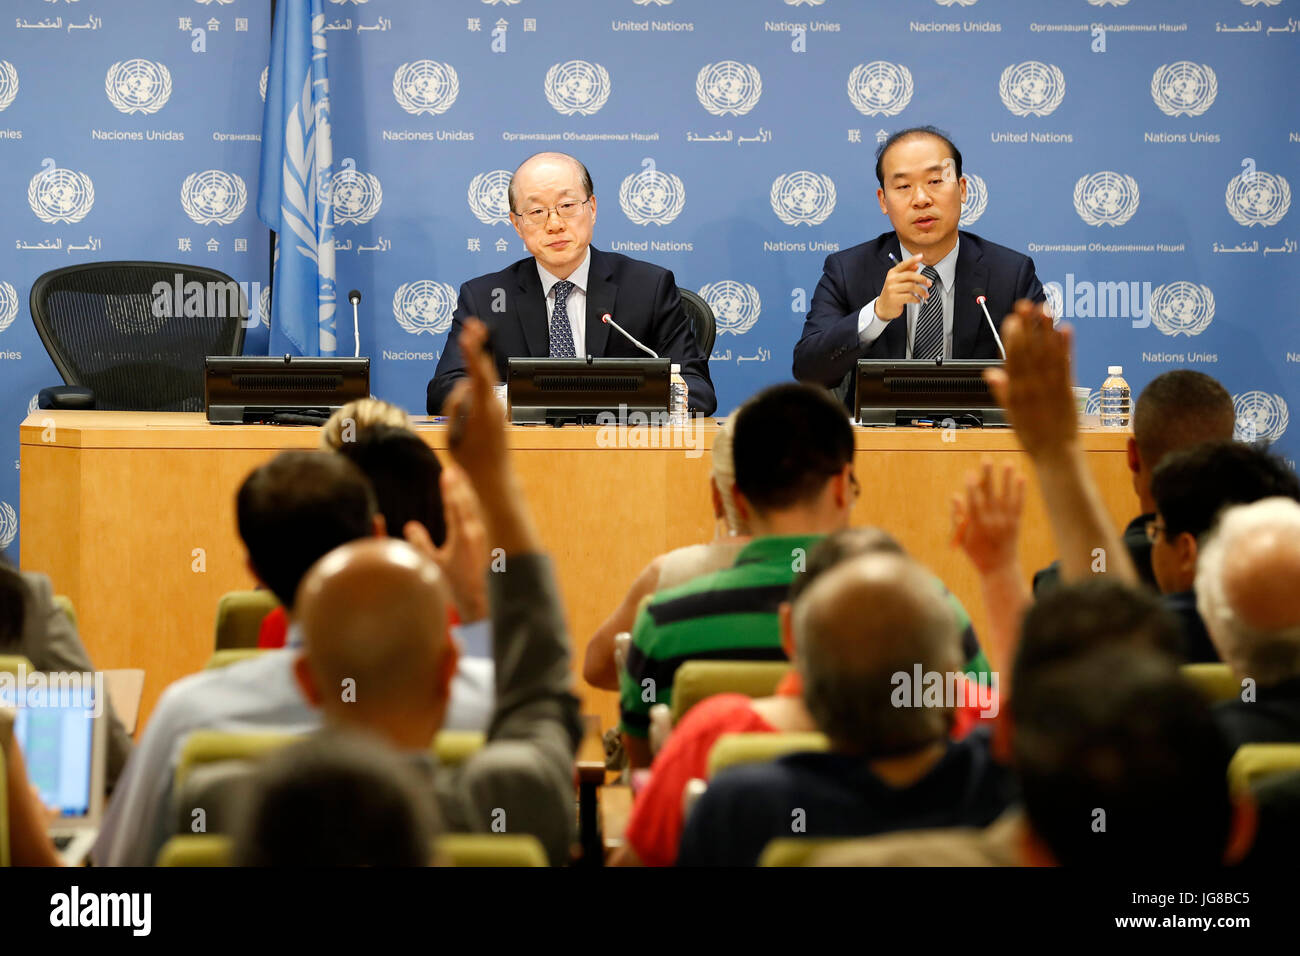 United Nations, UN headquarters. 4th July, 2017. Liu Jieyi (L), China's permanent representative to the Unite Nations and UN Security Council president for July, attends a press conference at the UN headquarters, July 4, 2017. Ambassador Liu Jieyi of China, UN Security Council president for July, said on Monday that issues of Syria, Yemen, South Sudan, Colombia, Haiti and Cyprus will be on the agenda of the 15-nation council in July. Credit: Li Muzi/Xinhua/Alamy Live News Stock Photo